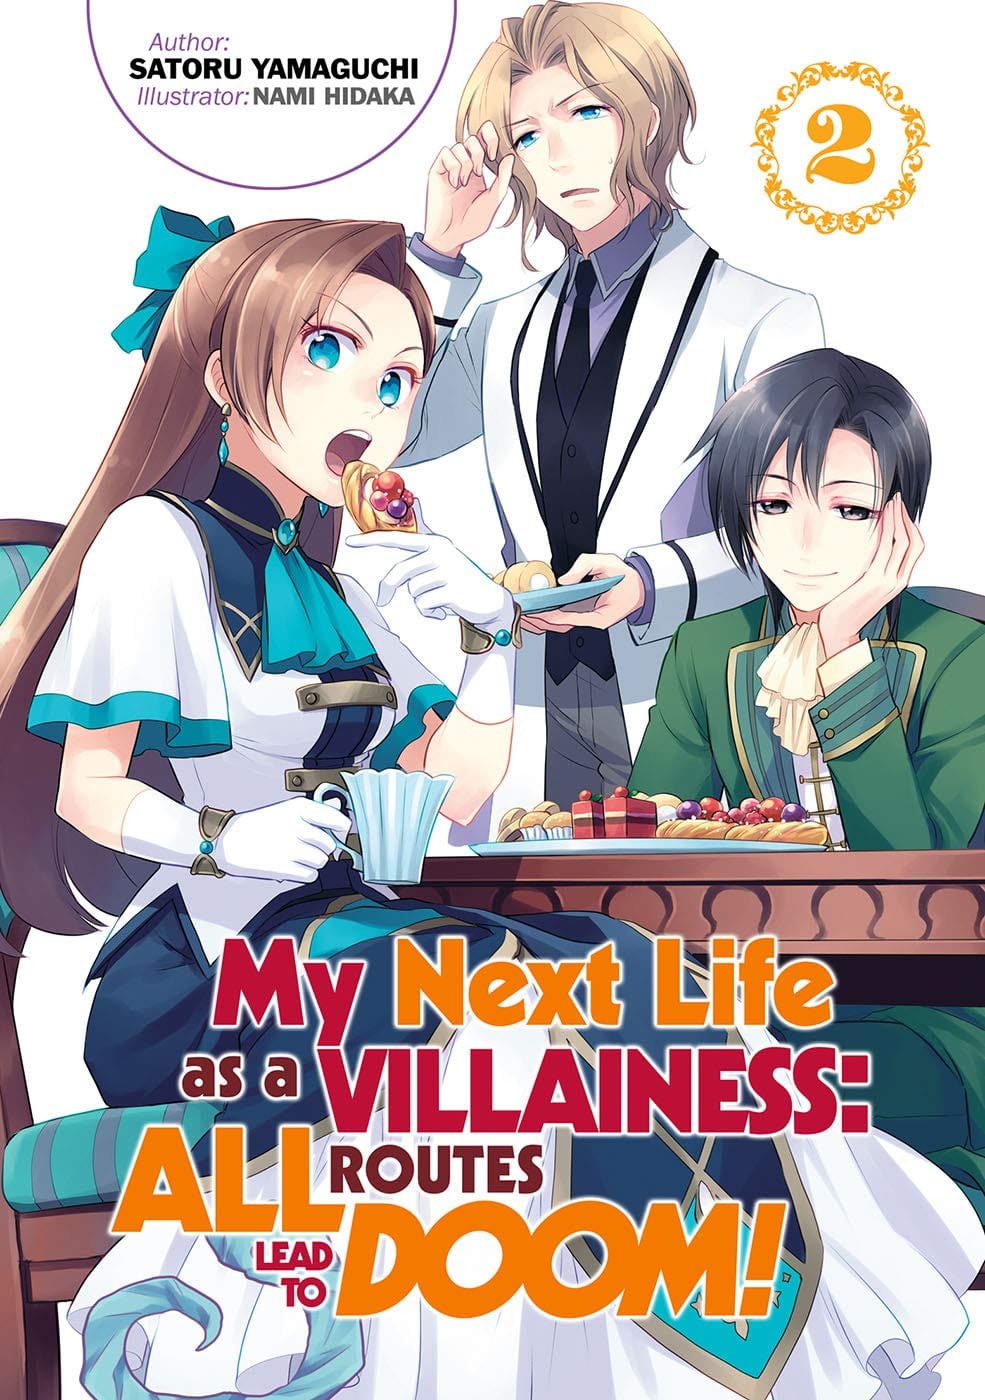 My Next Life as a Villainess: All Routes Lead to Doom! Vol. 2 - Third Eye